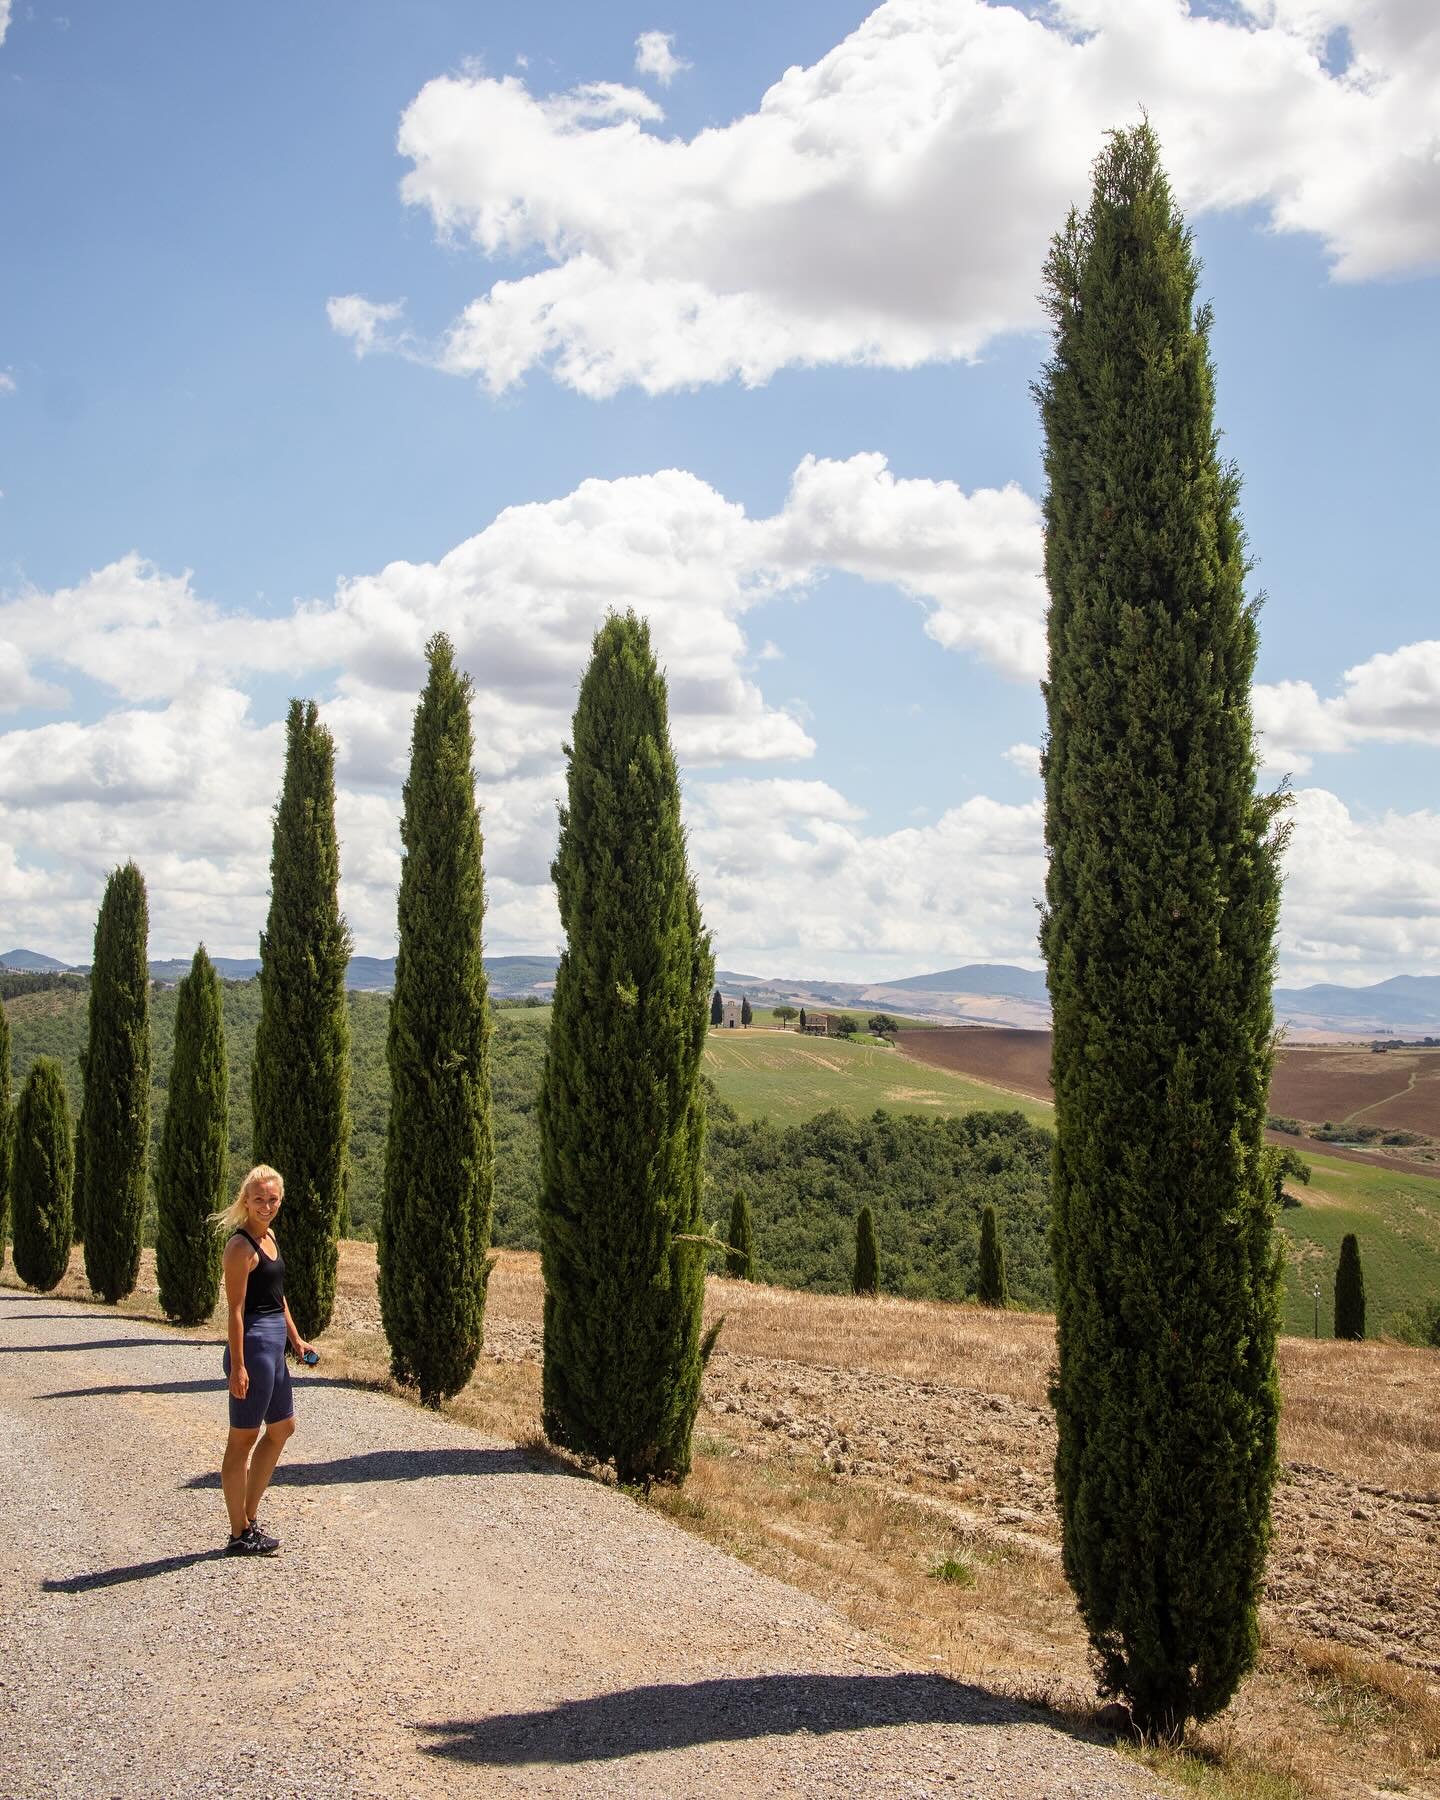 How To Actually Stick To Your Wellness Goals ⤵️

Standing tall between these majestic cypress trees in Tuscany, it hit me that if you can approach your wellness goals like the sturdy cypress trees - grounded, and resilient even in harsh weather condi